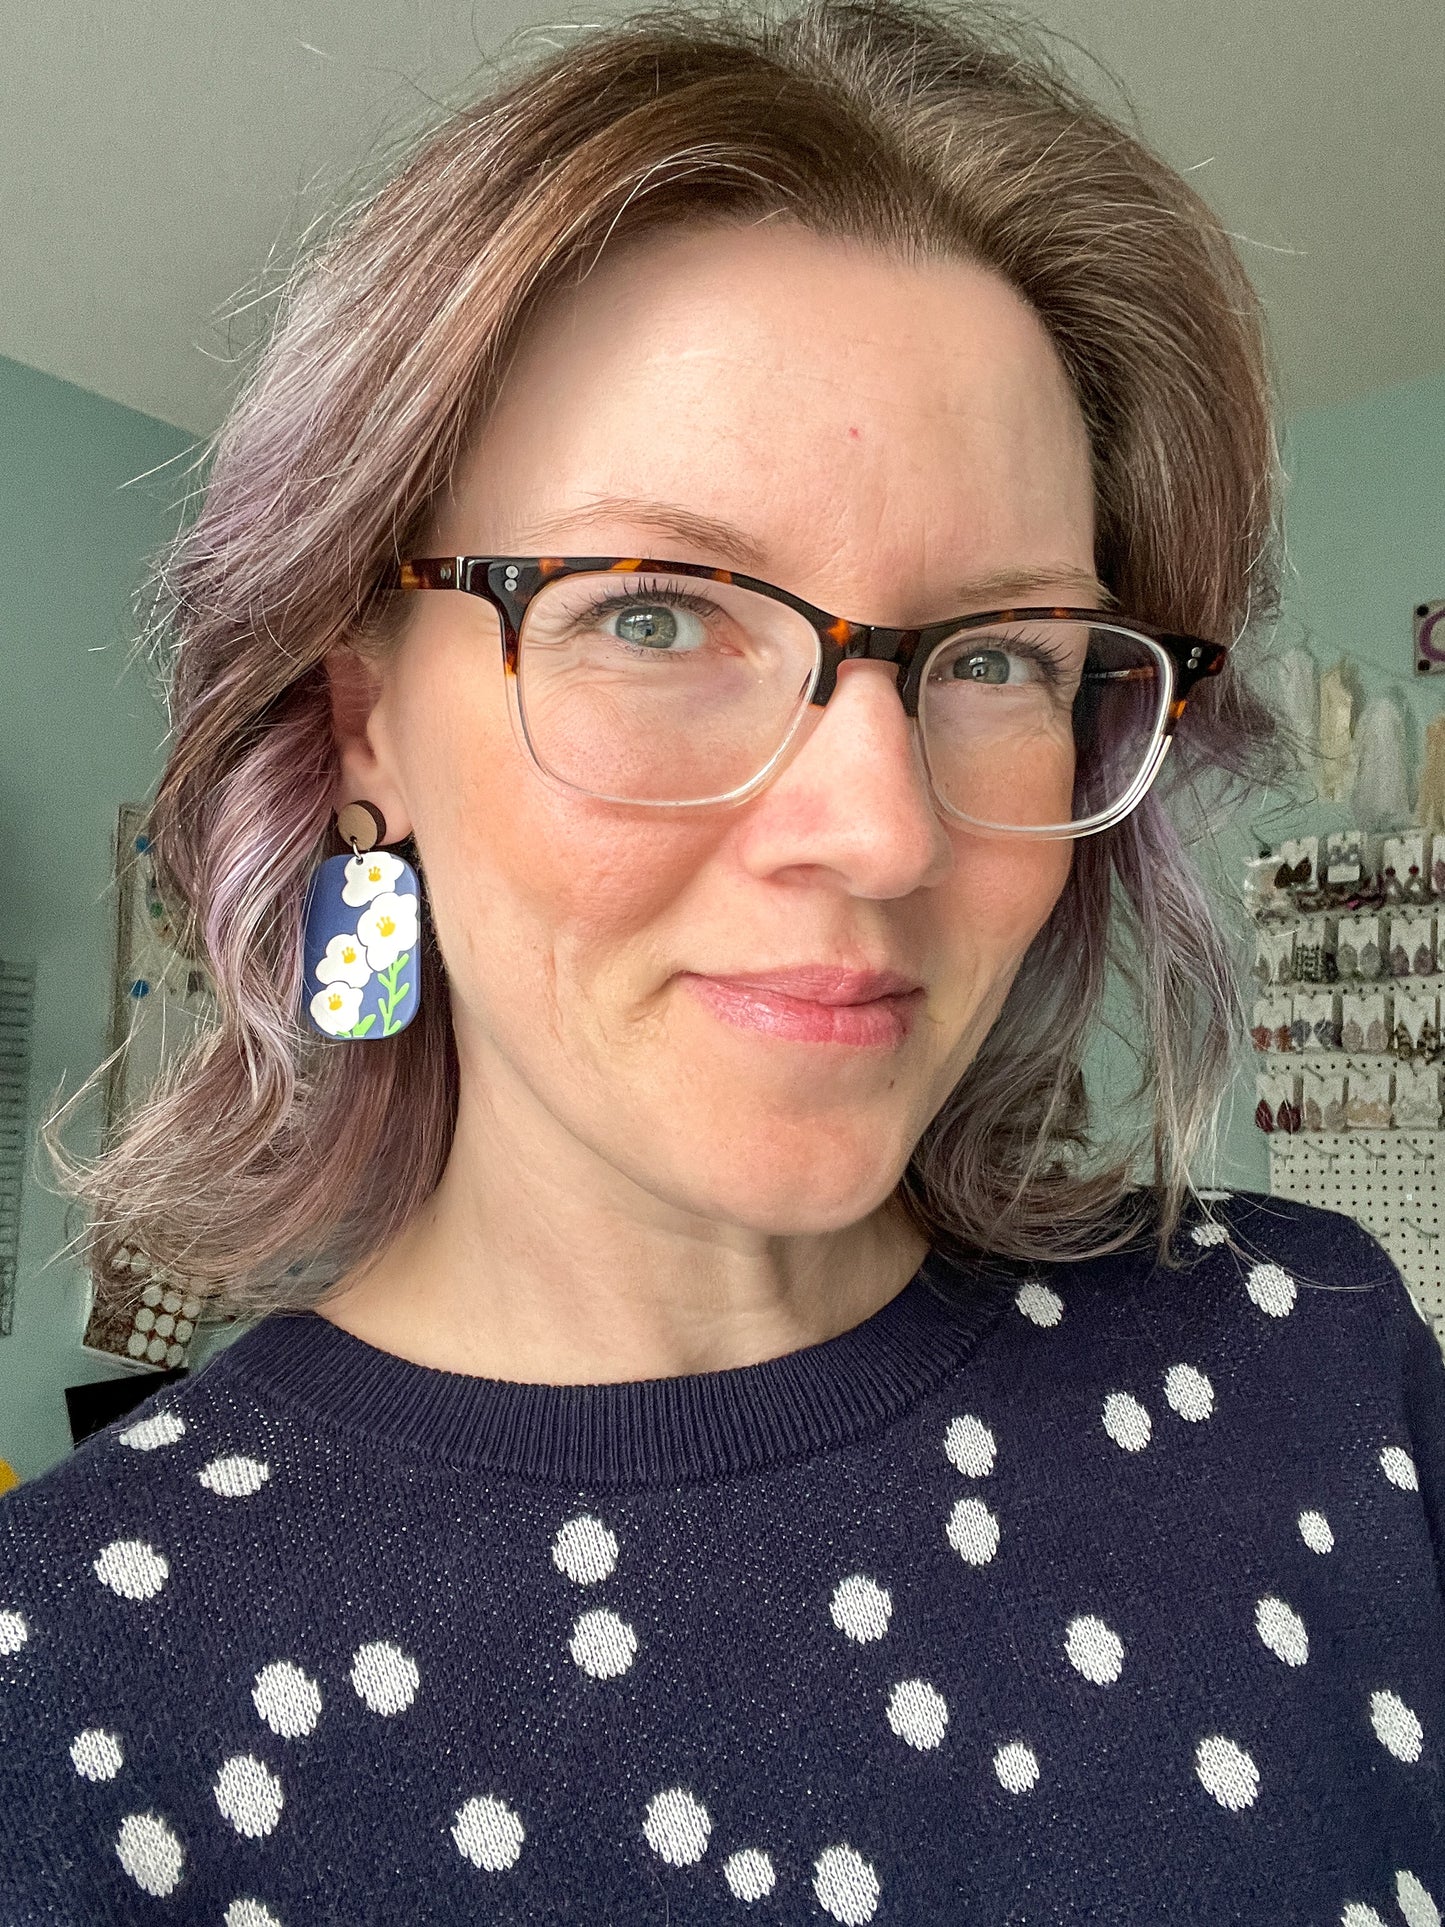 Blue & White Floral Rectangular Acetate Earrings: Choose From 2 Styles